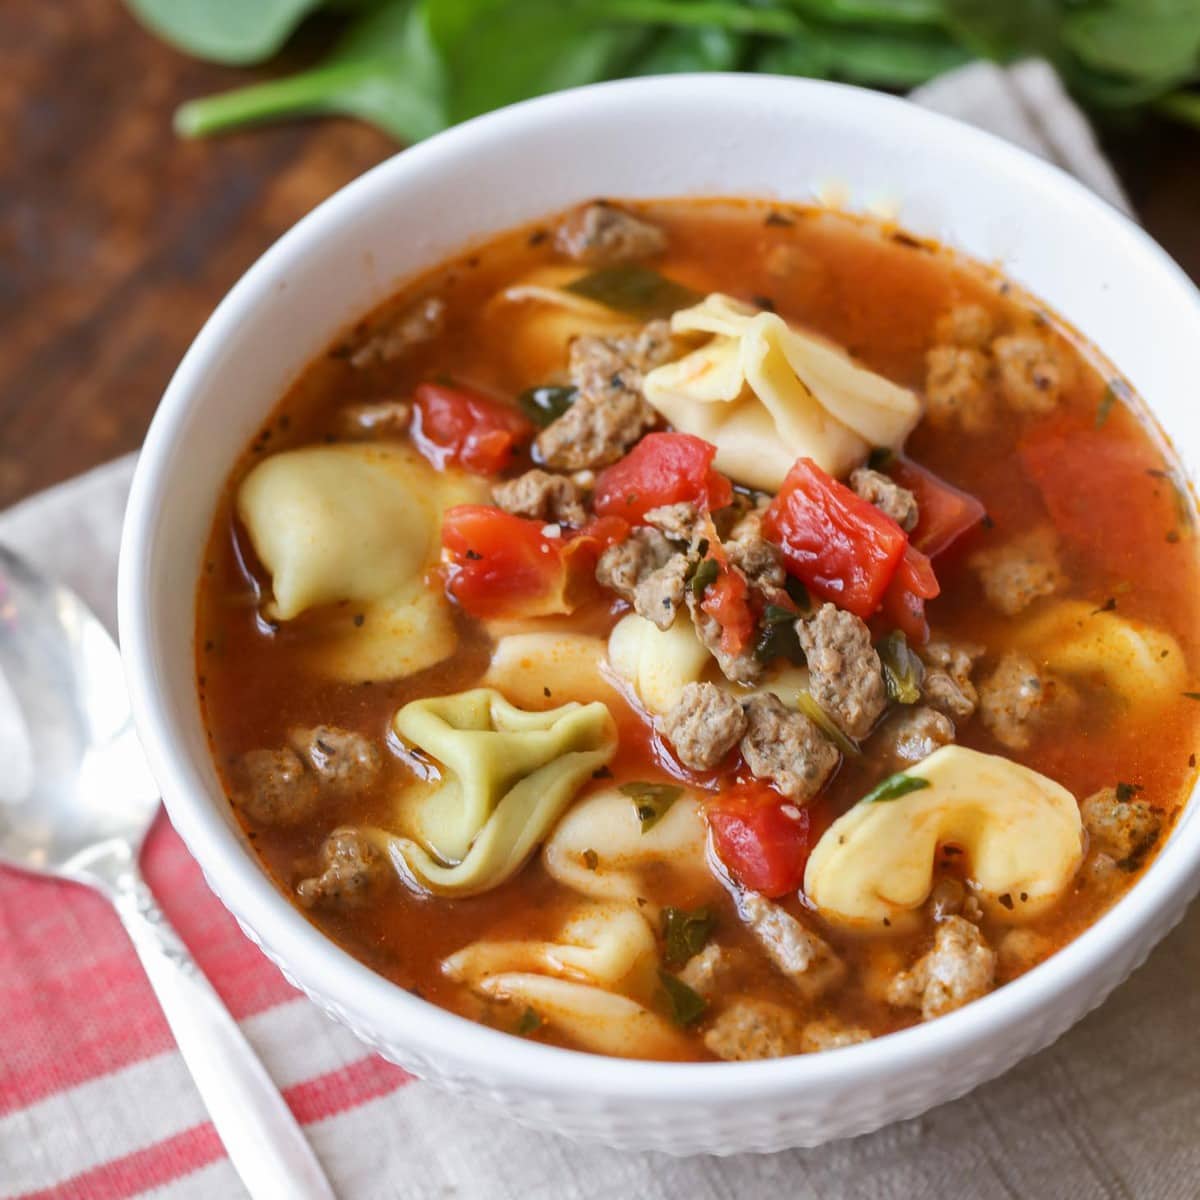 Easy soup recipes - Sausage tortellini soup in a white bowl.